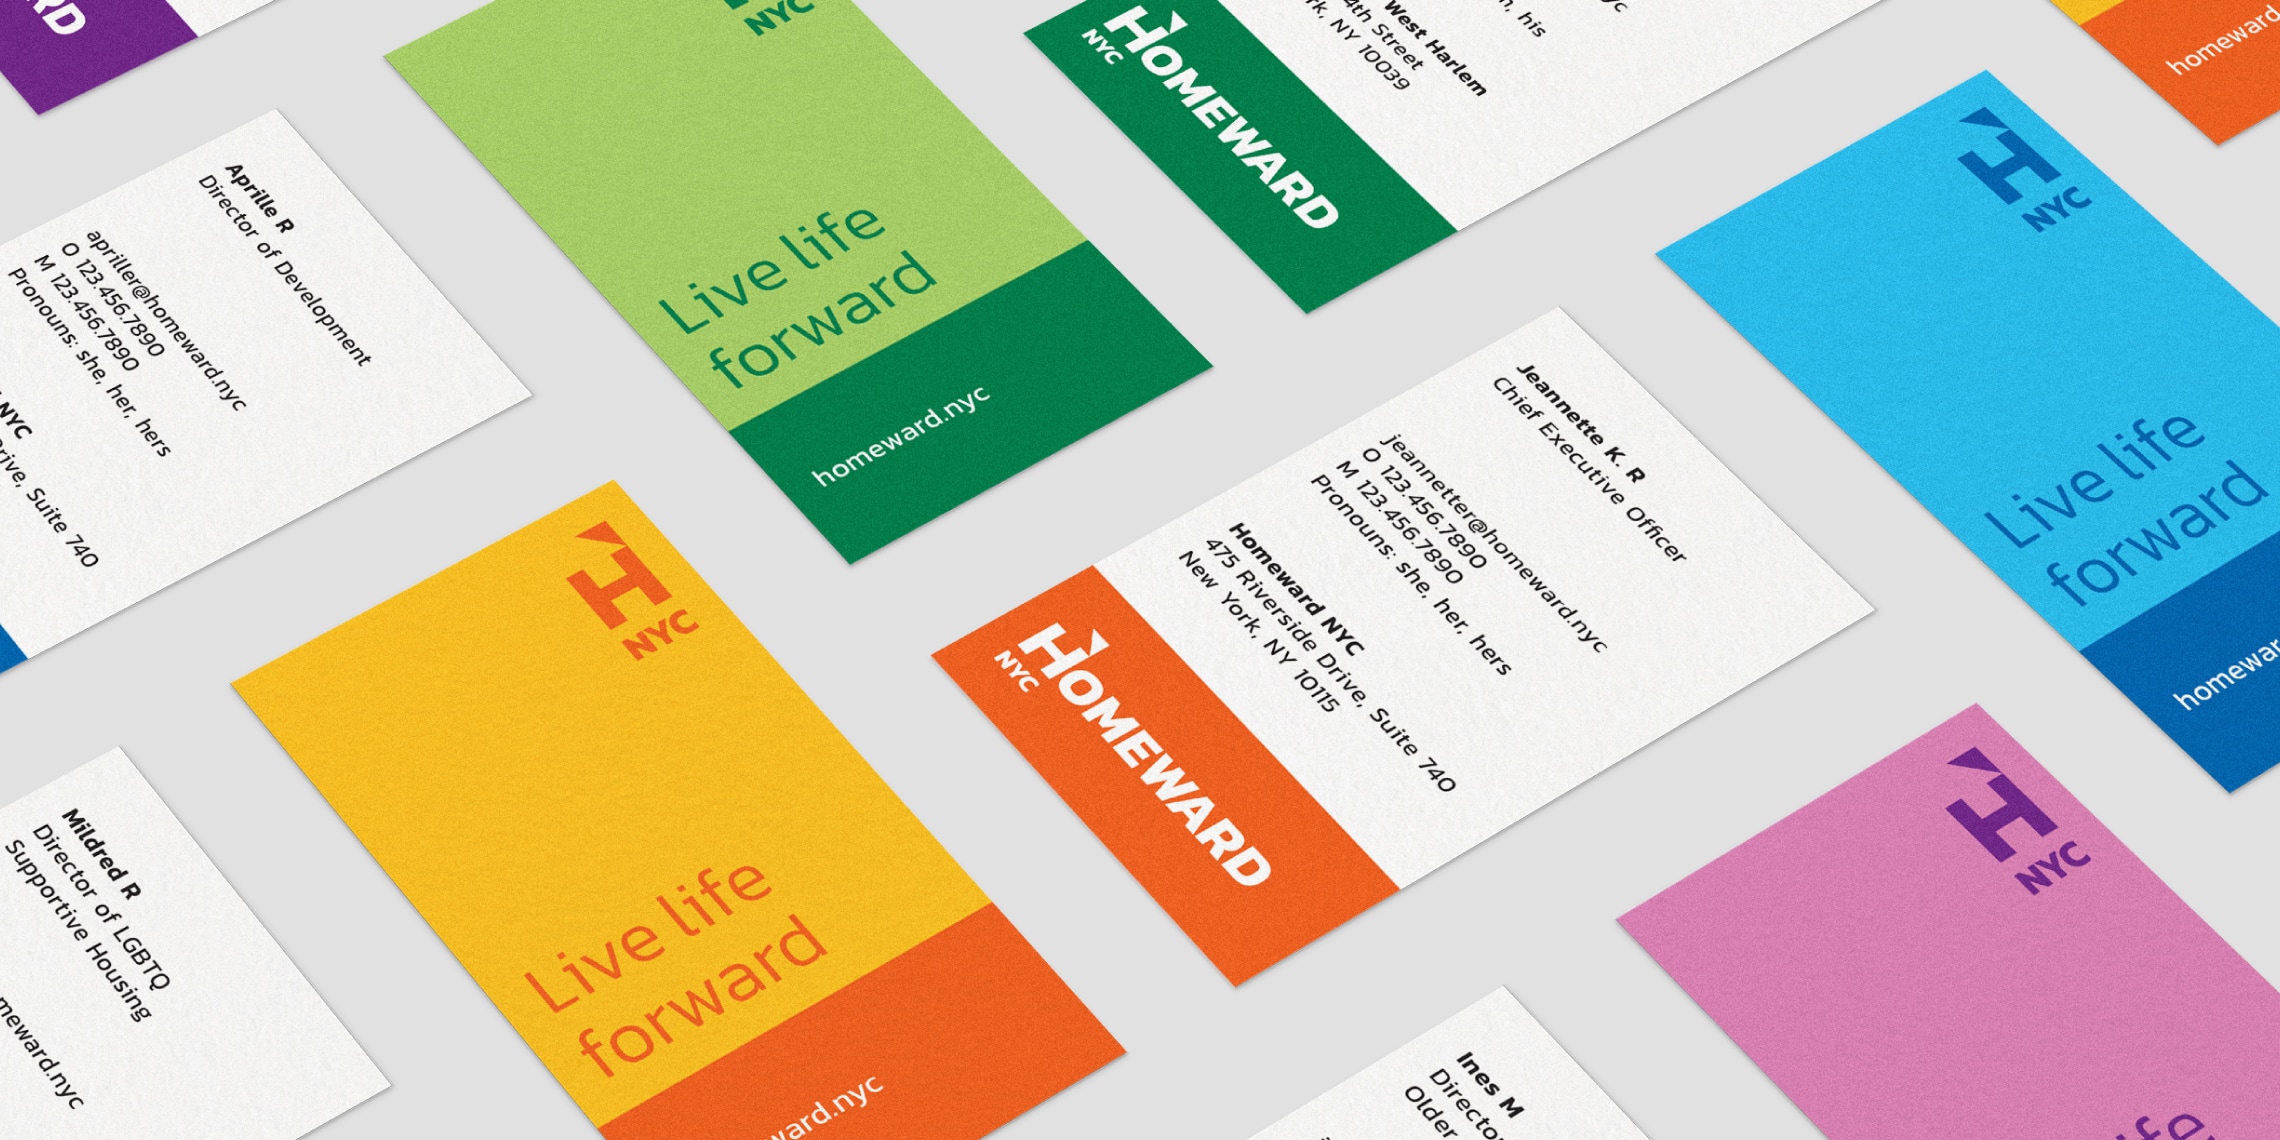 Examples of business cards showing how to apply the brand identity developed for Homeward NYC